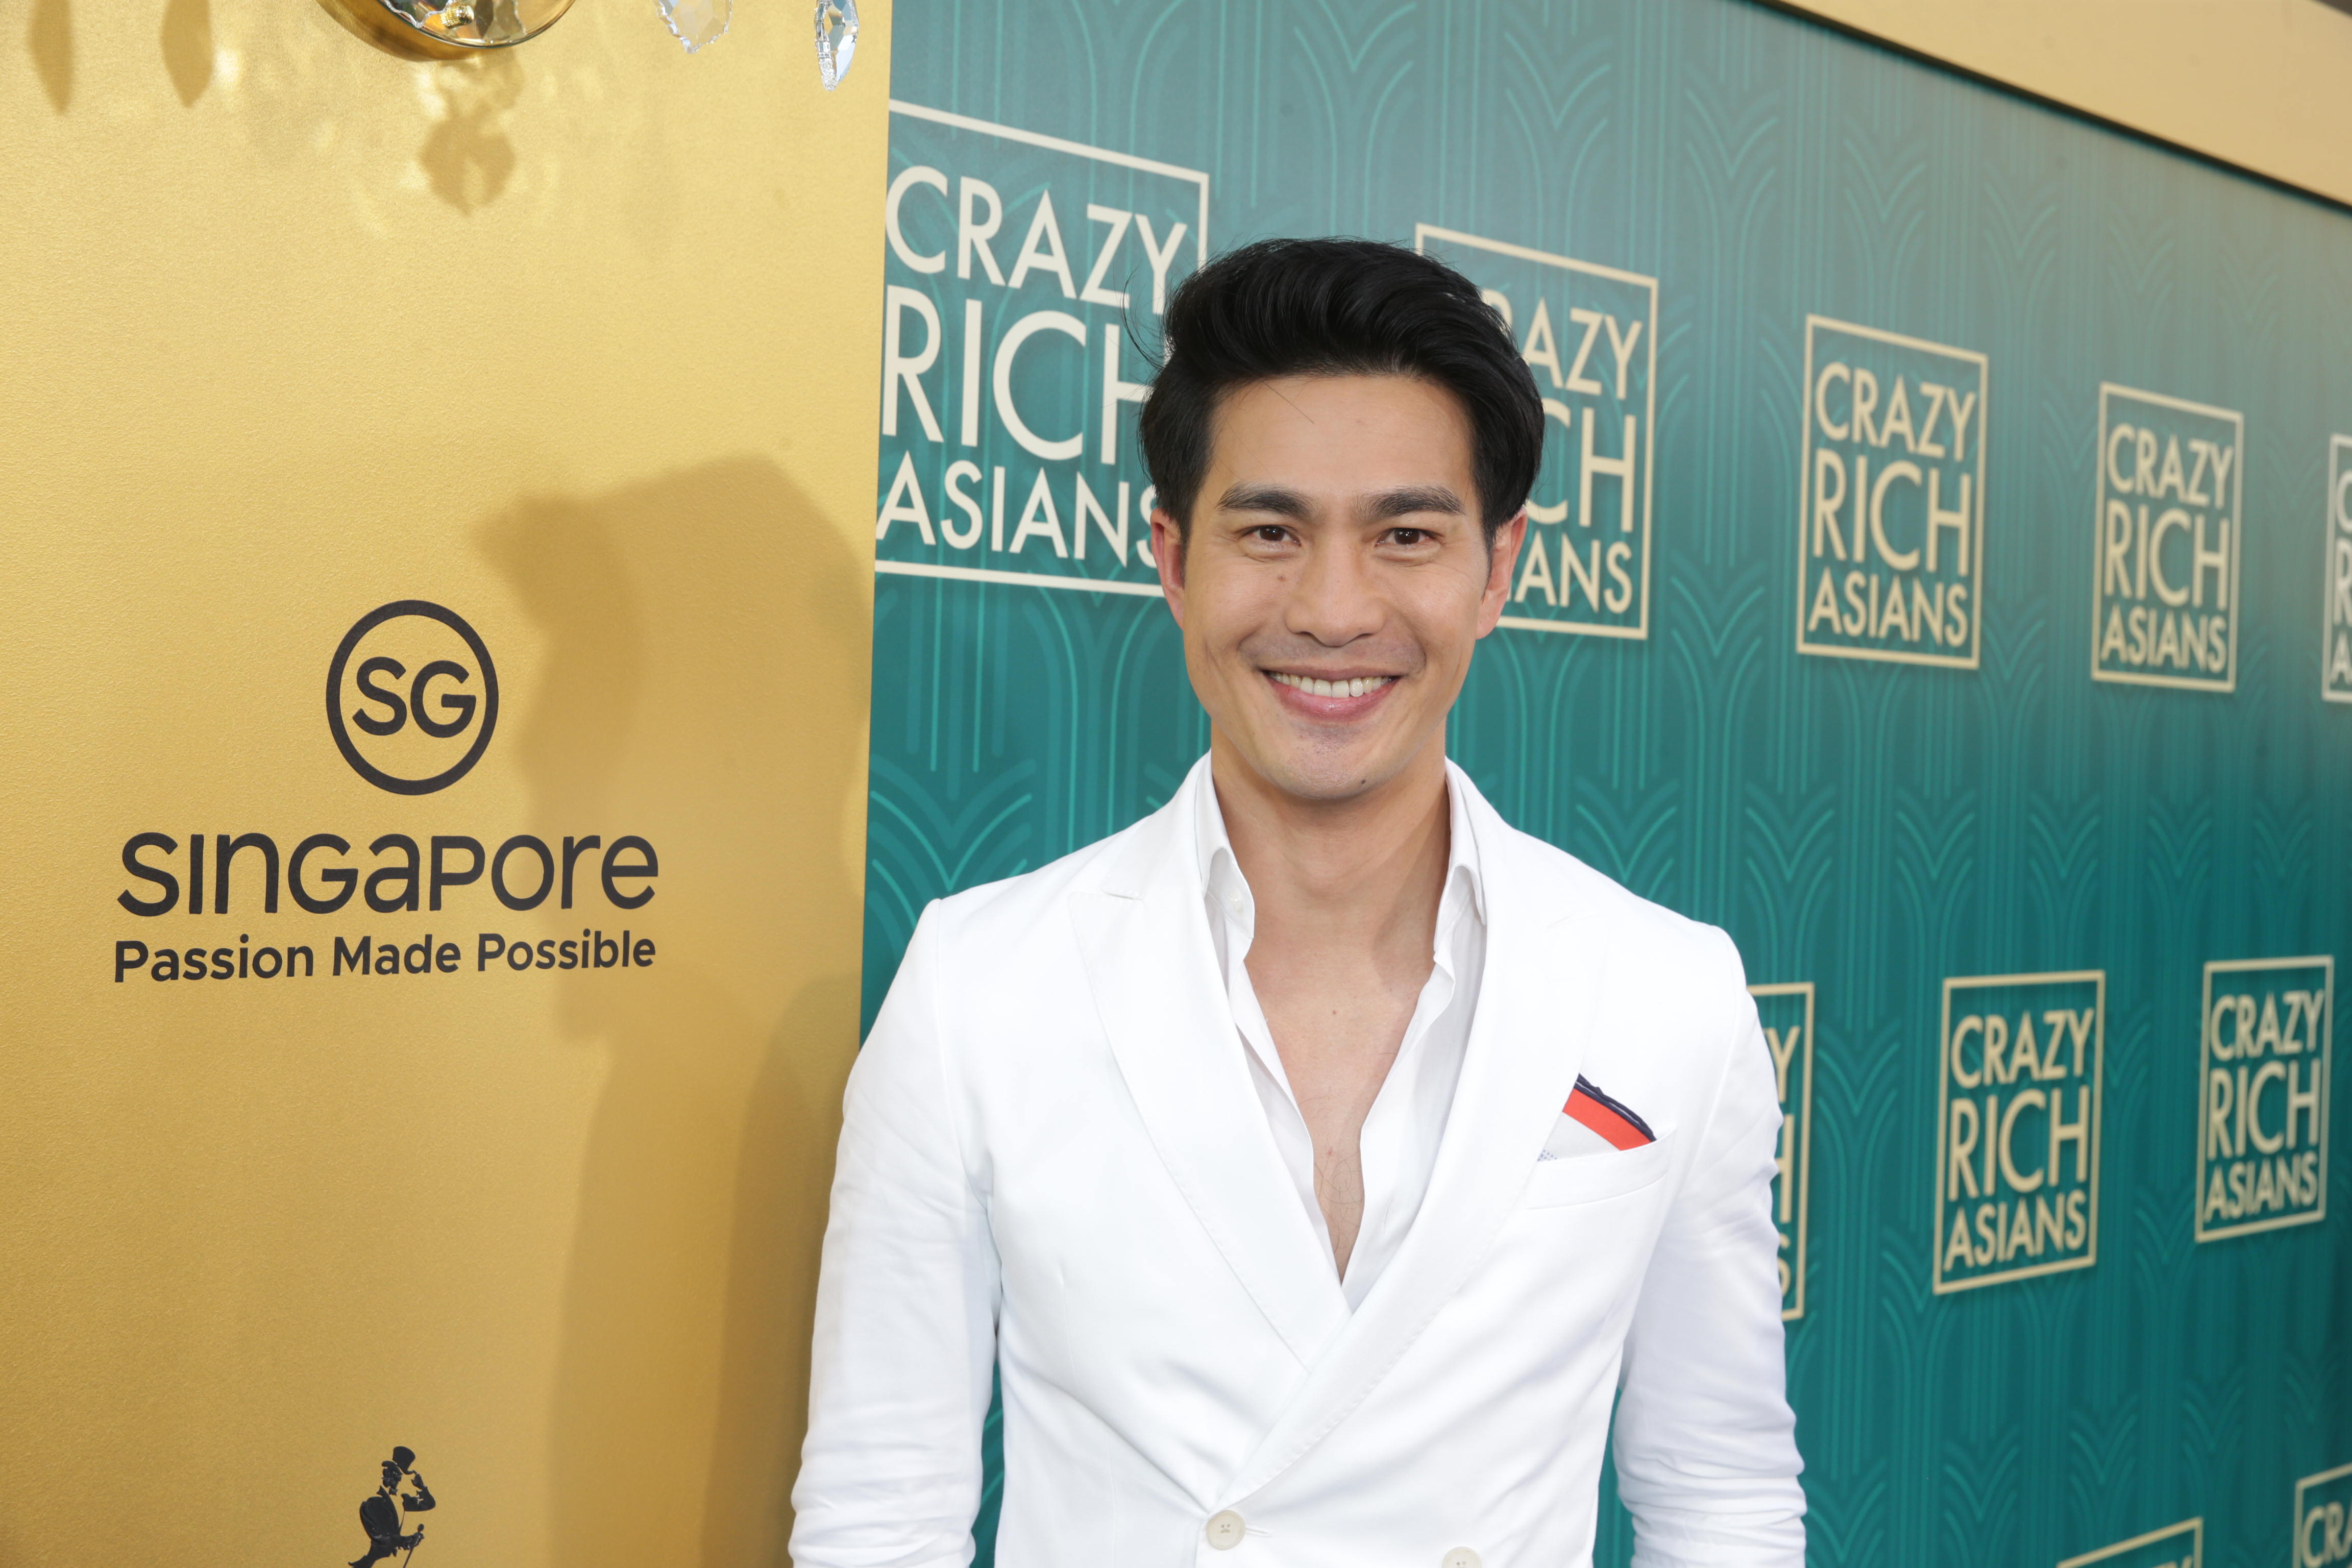 Pierre Png On How Nervous He Was On The Crazy Rich Asians Jade Carpet & Making Plans To Hang Out With Michelle Yeoh Next Month